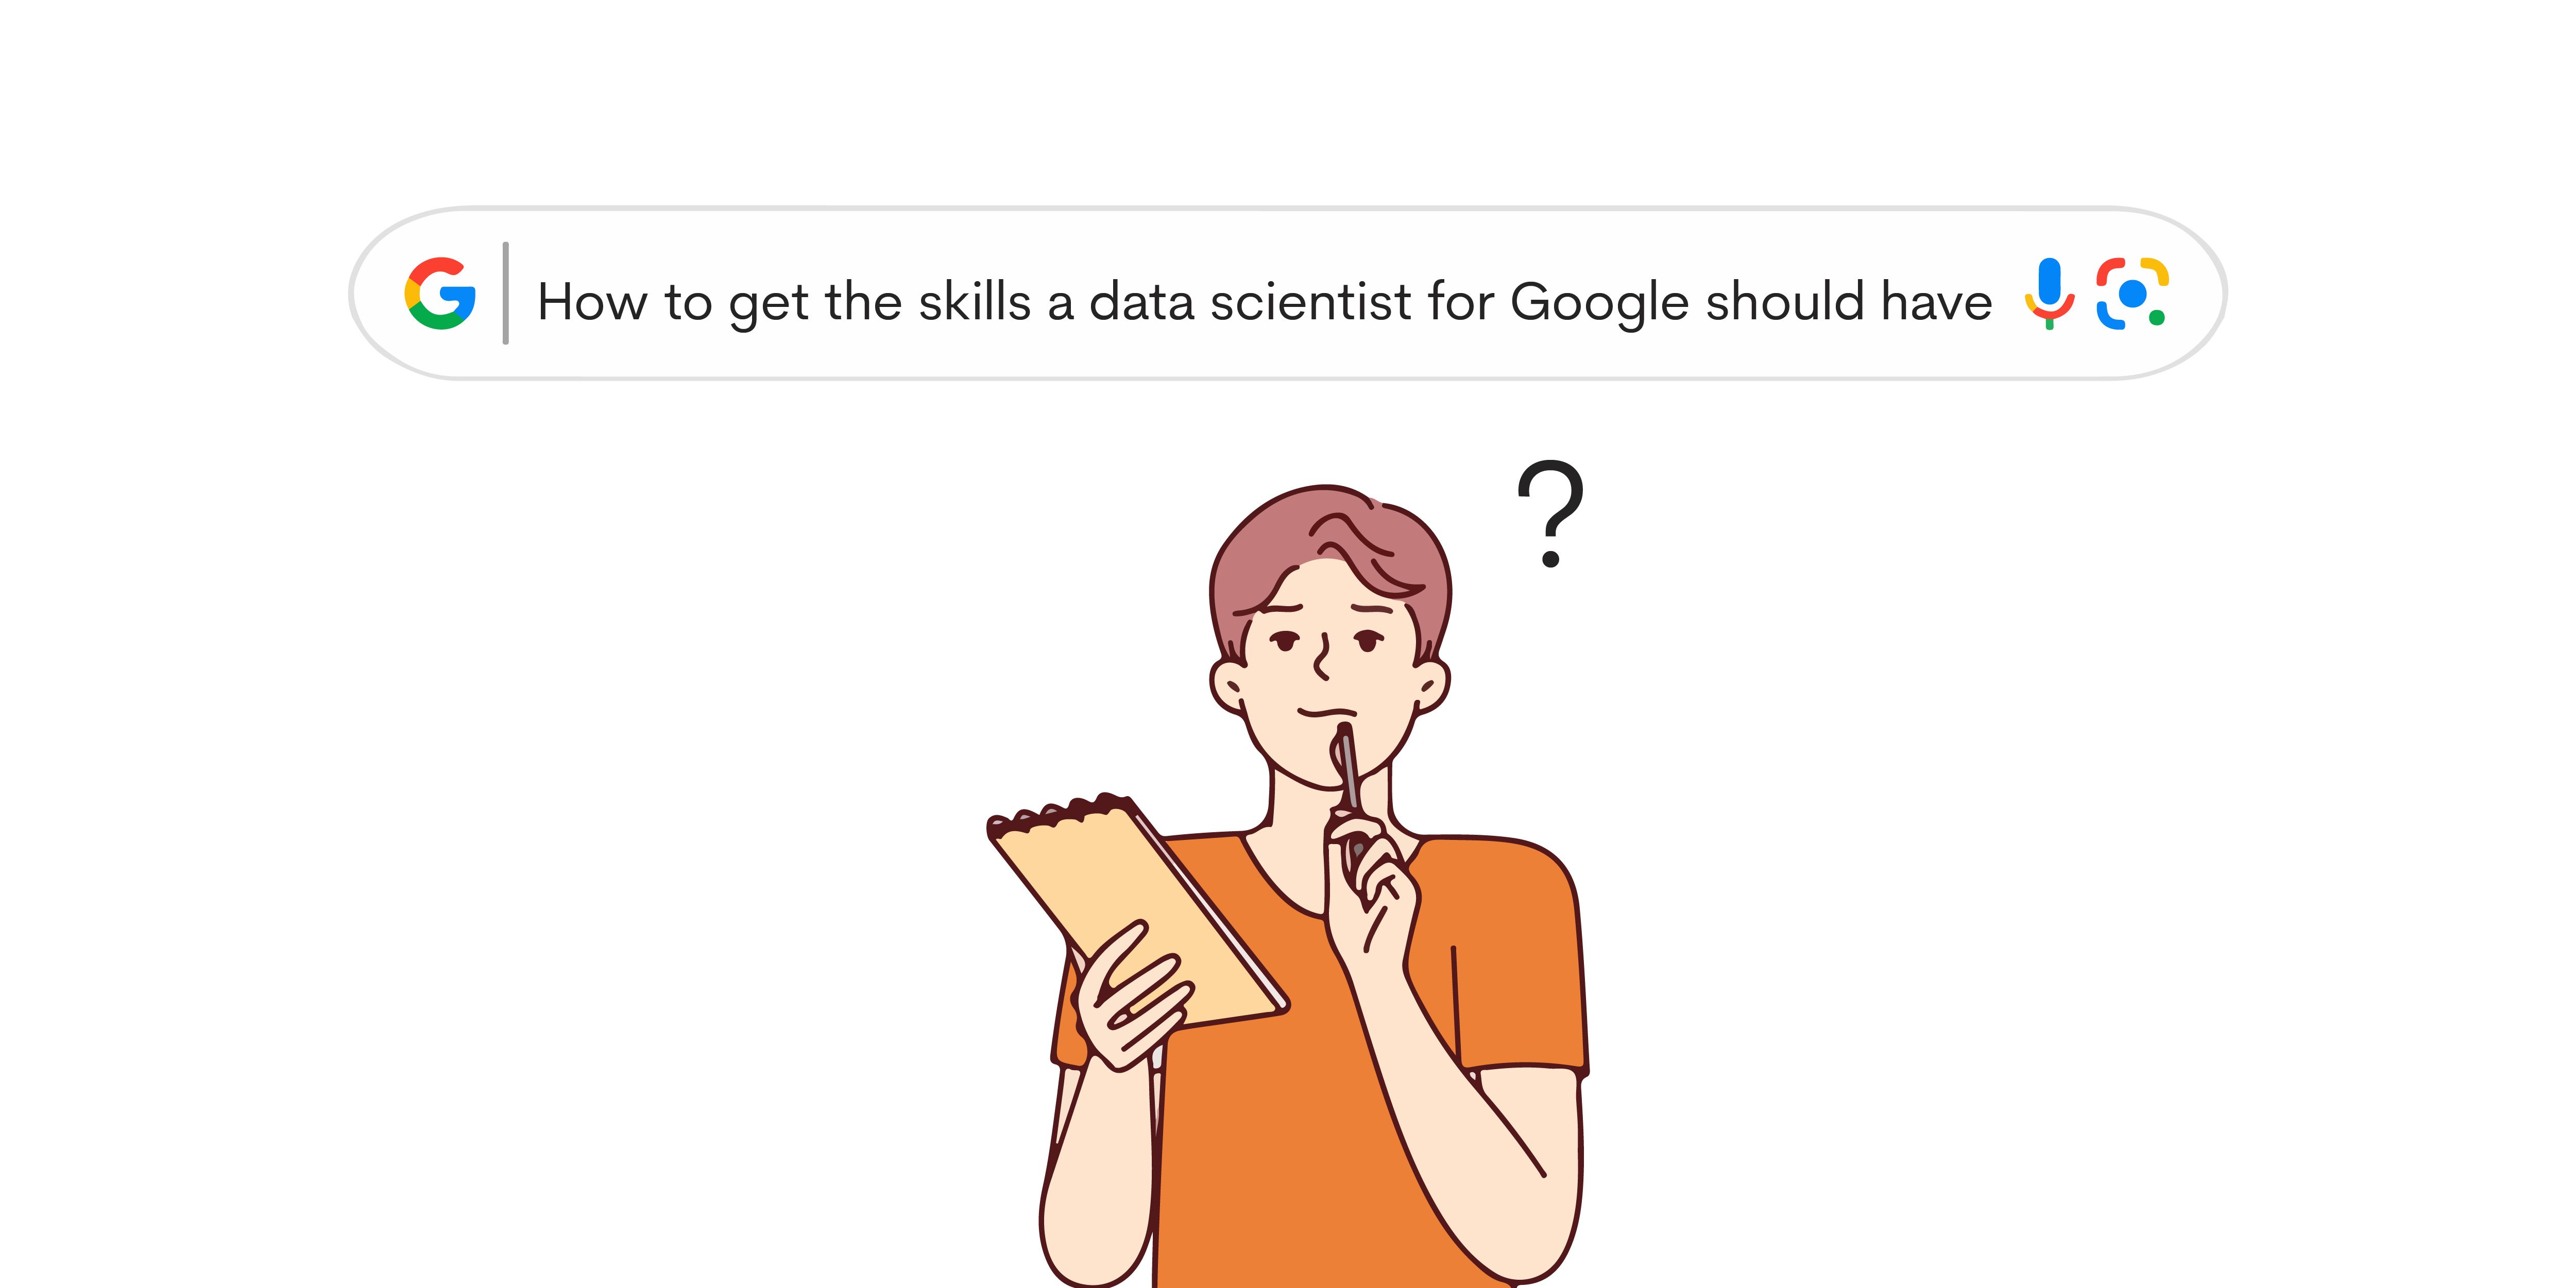 How to get the skills a data scientist for Google should have